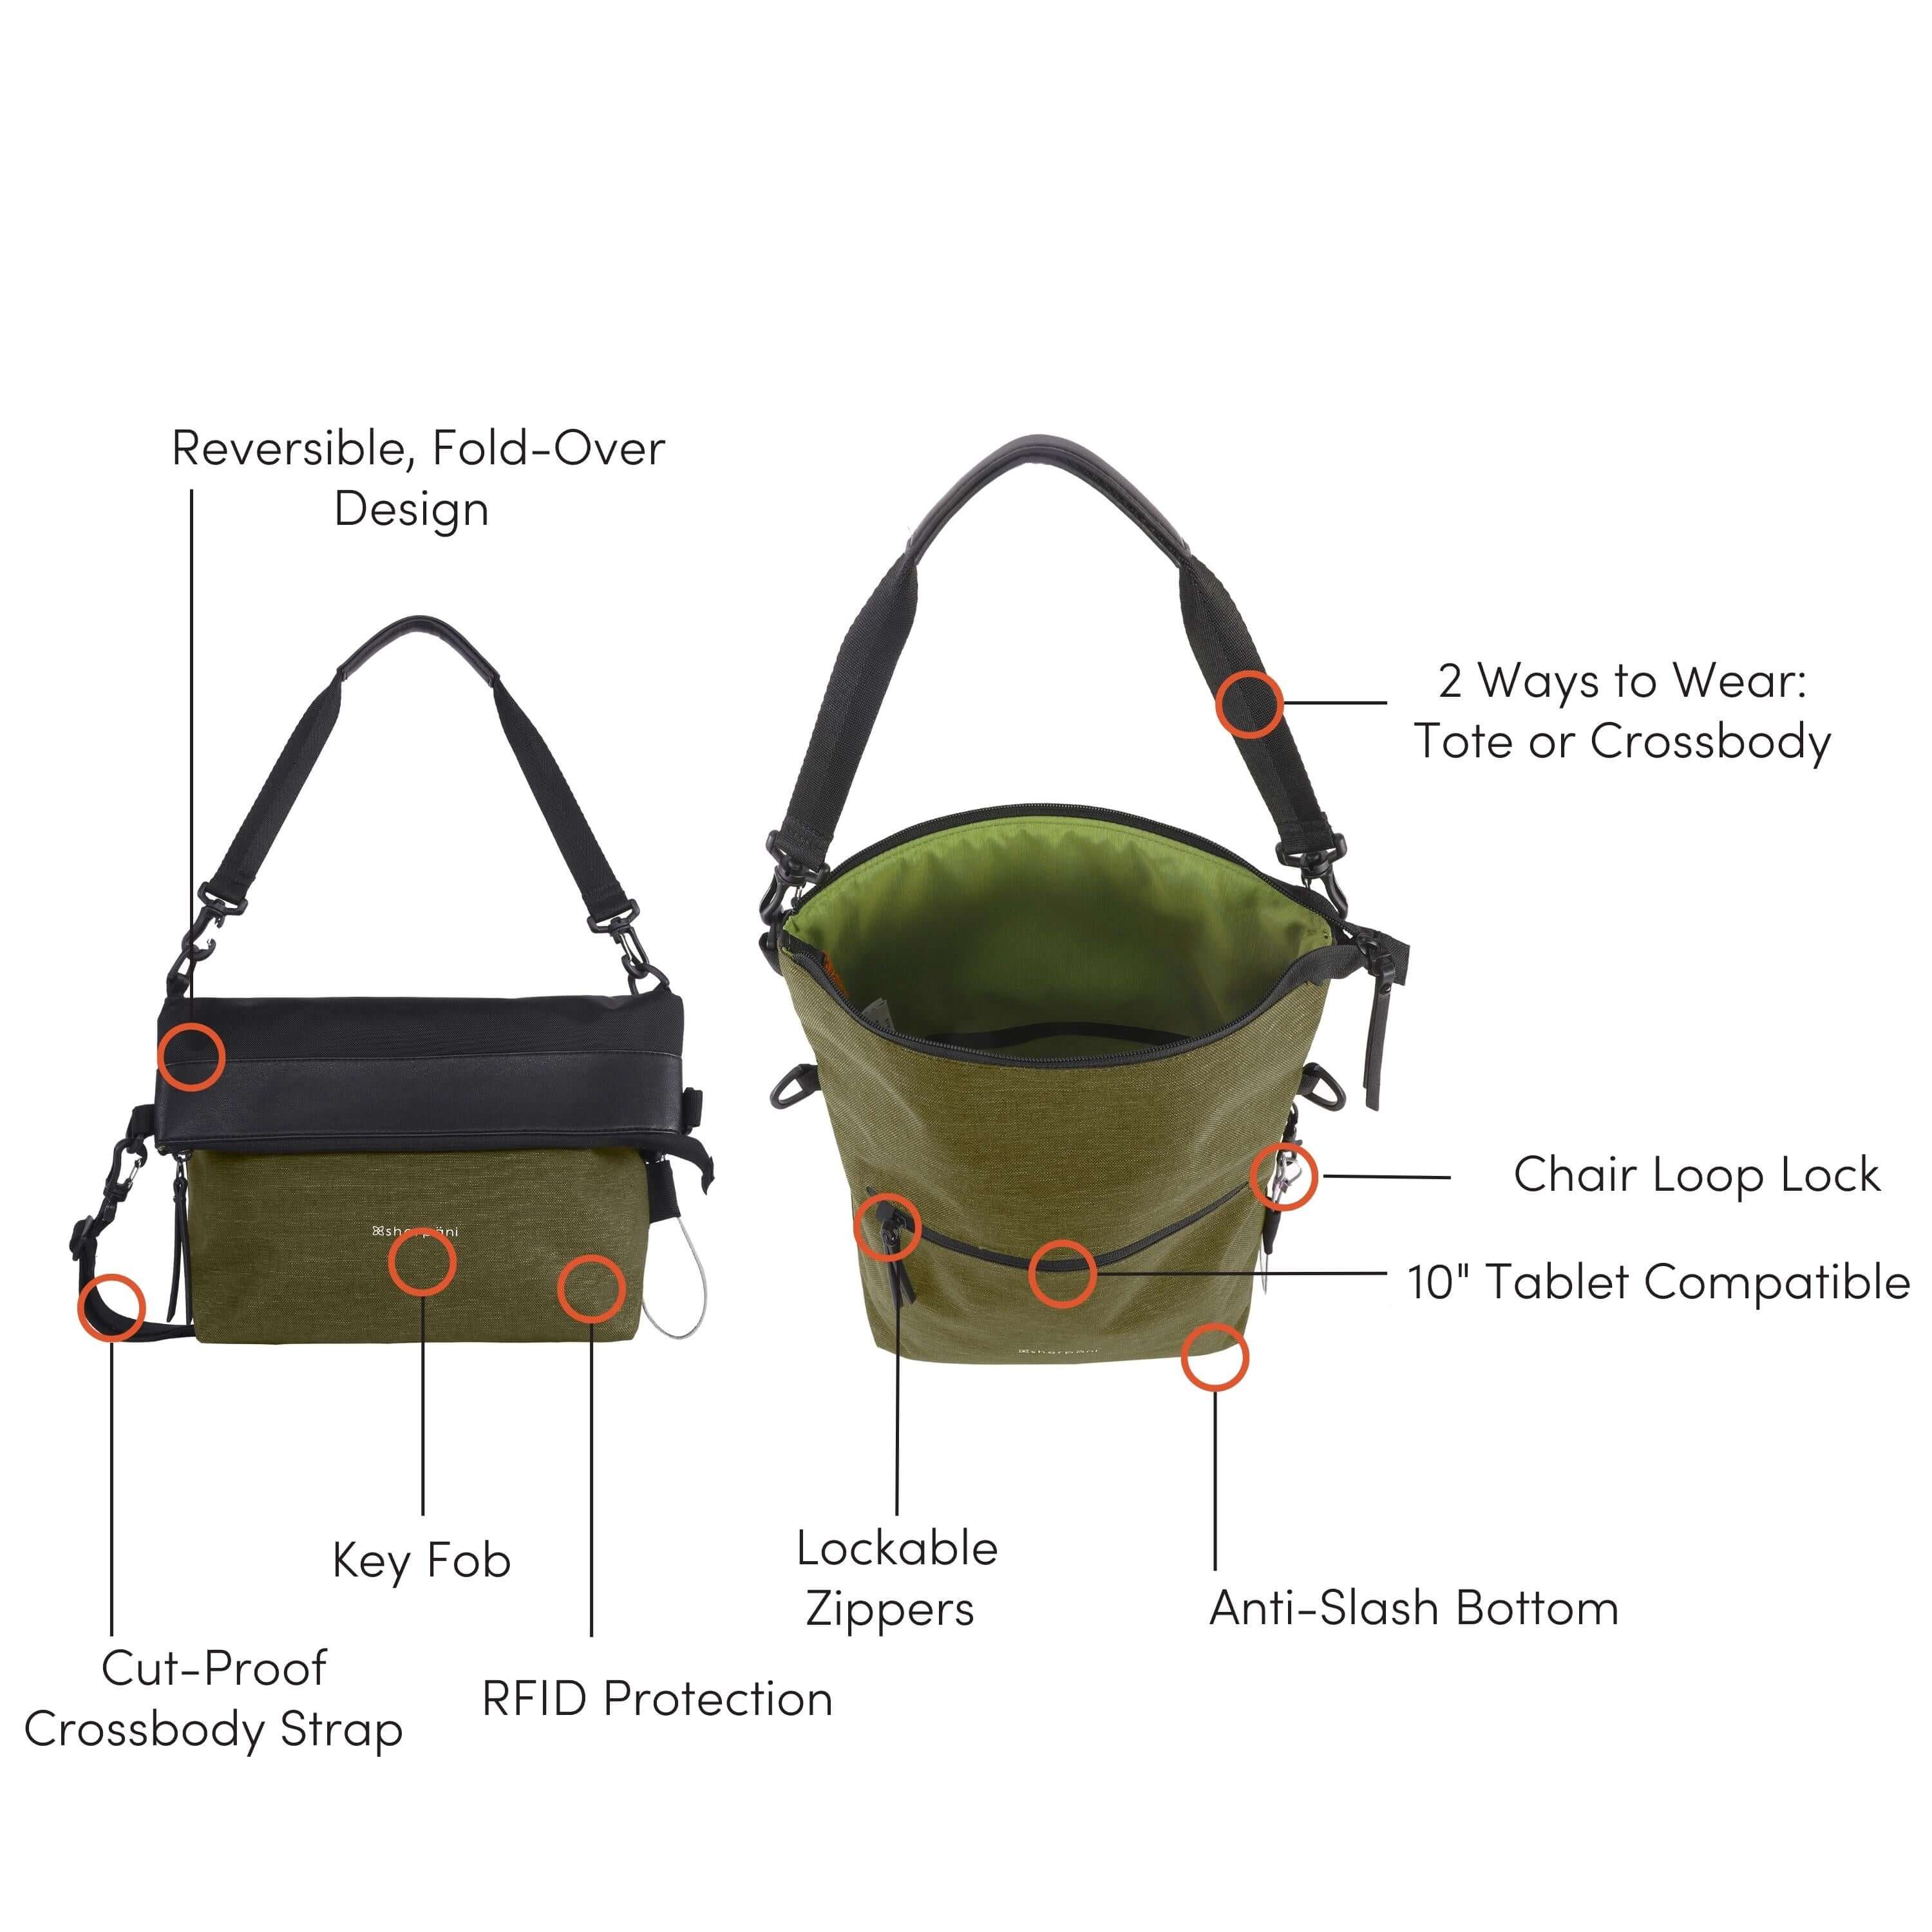 Graphic showcasing the features of Sherpani’s Anti Theft bag, the Vale AT in Loden. The bag is shown two ways: closed and folded over, open and standing tall. Red circles highlight the following features: Reversible, Fold-Over Design, 2 Ways to Wear: Tote or Crossbody, Chair Loop Lock, 1” Tablet Compatible, Anti-Slash Bottom, Lockable Zippers, RFID Protection, Key Fob, Cut-Proof Crossbody Strap. 